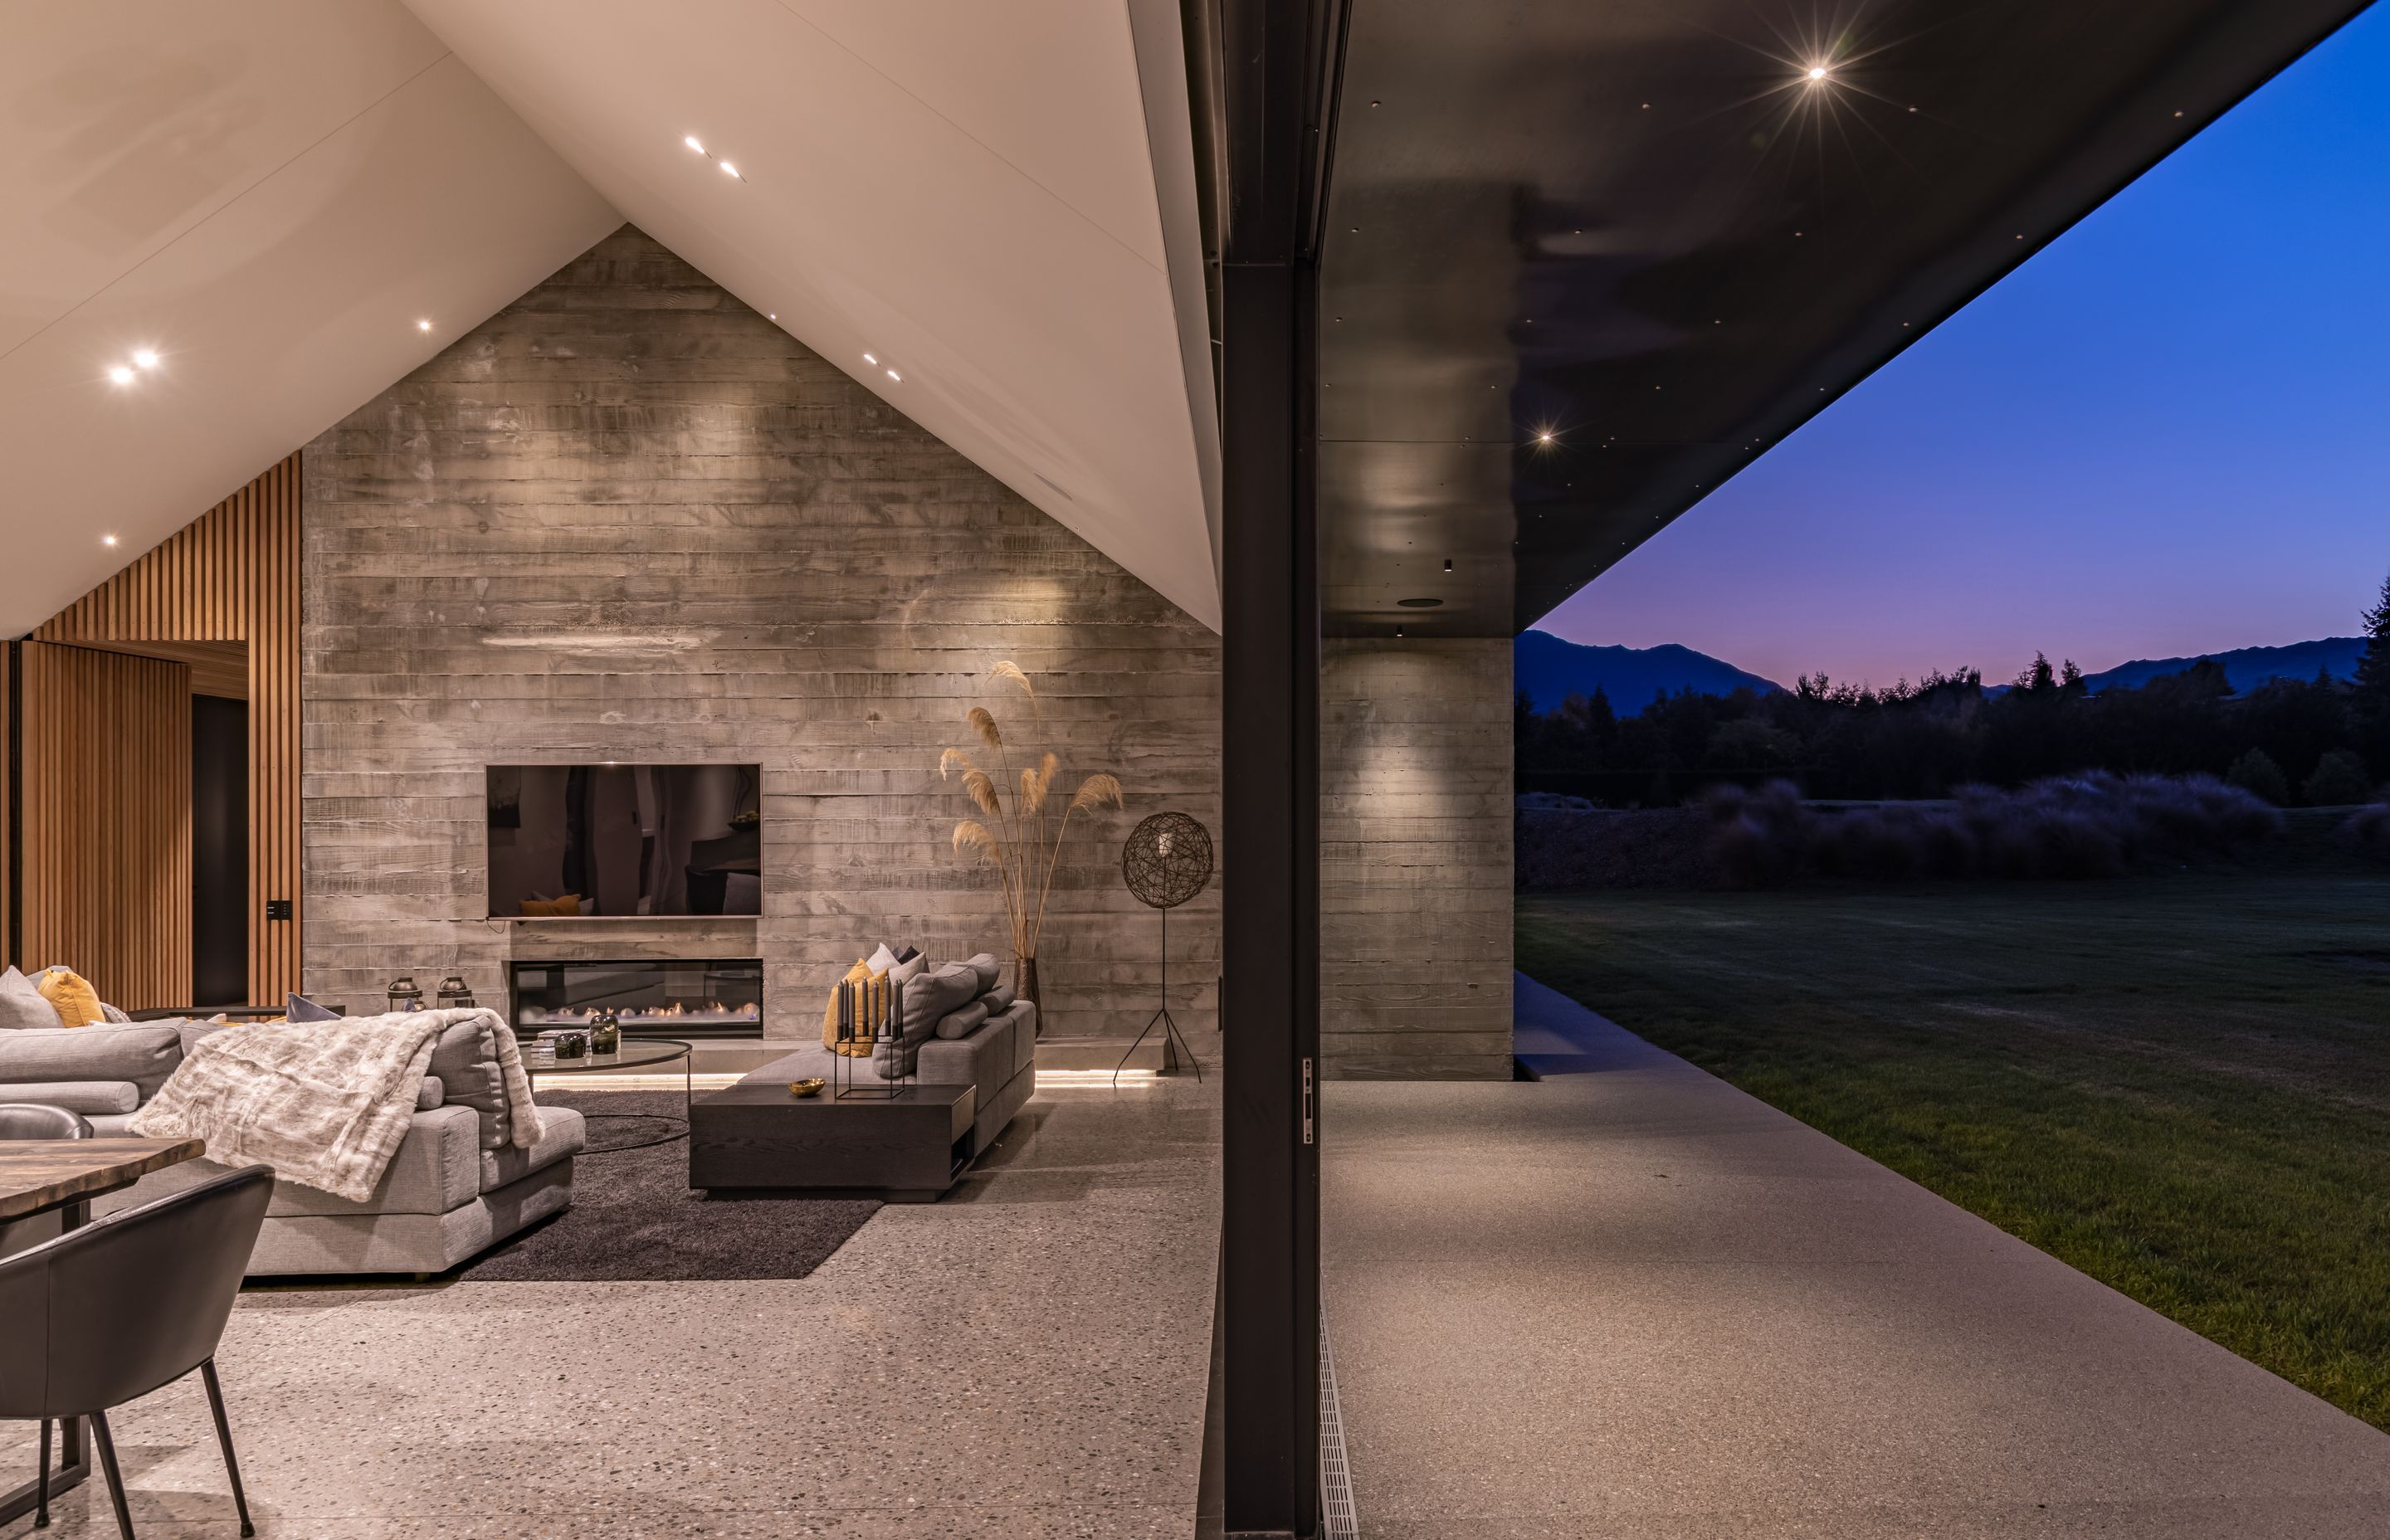 Concrete textures continue from the exterior to the interior.